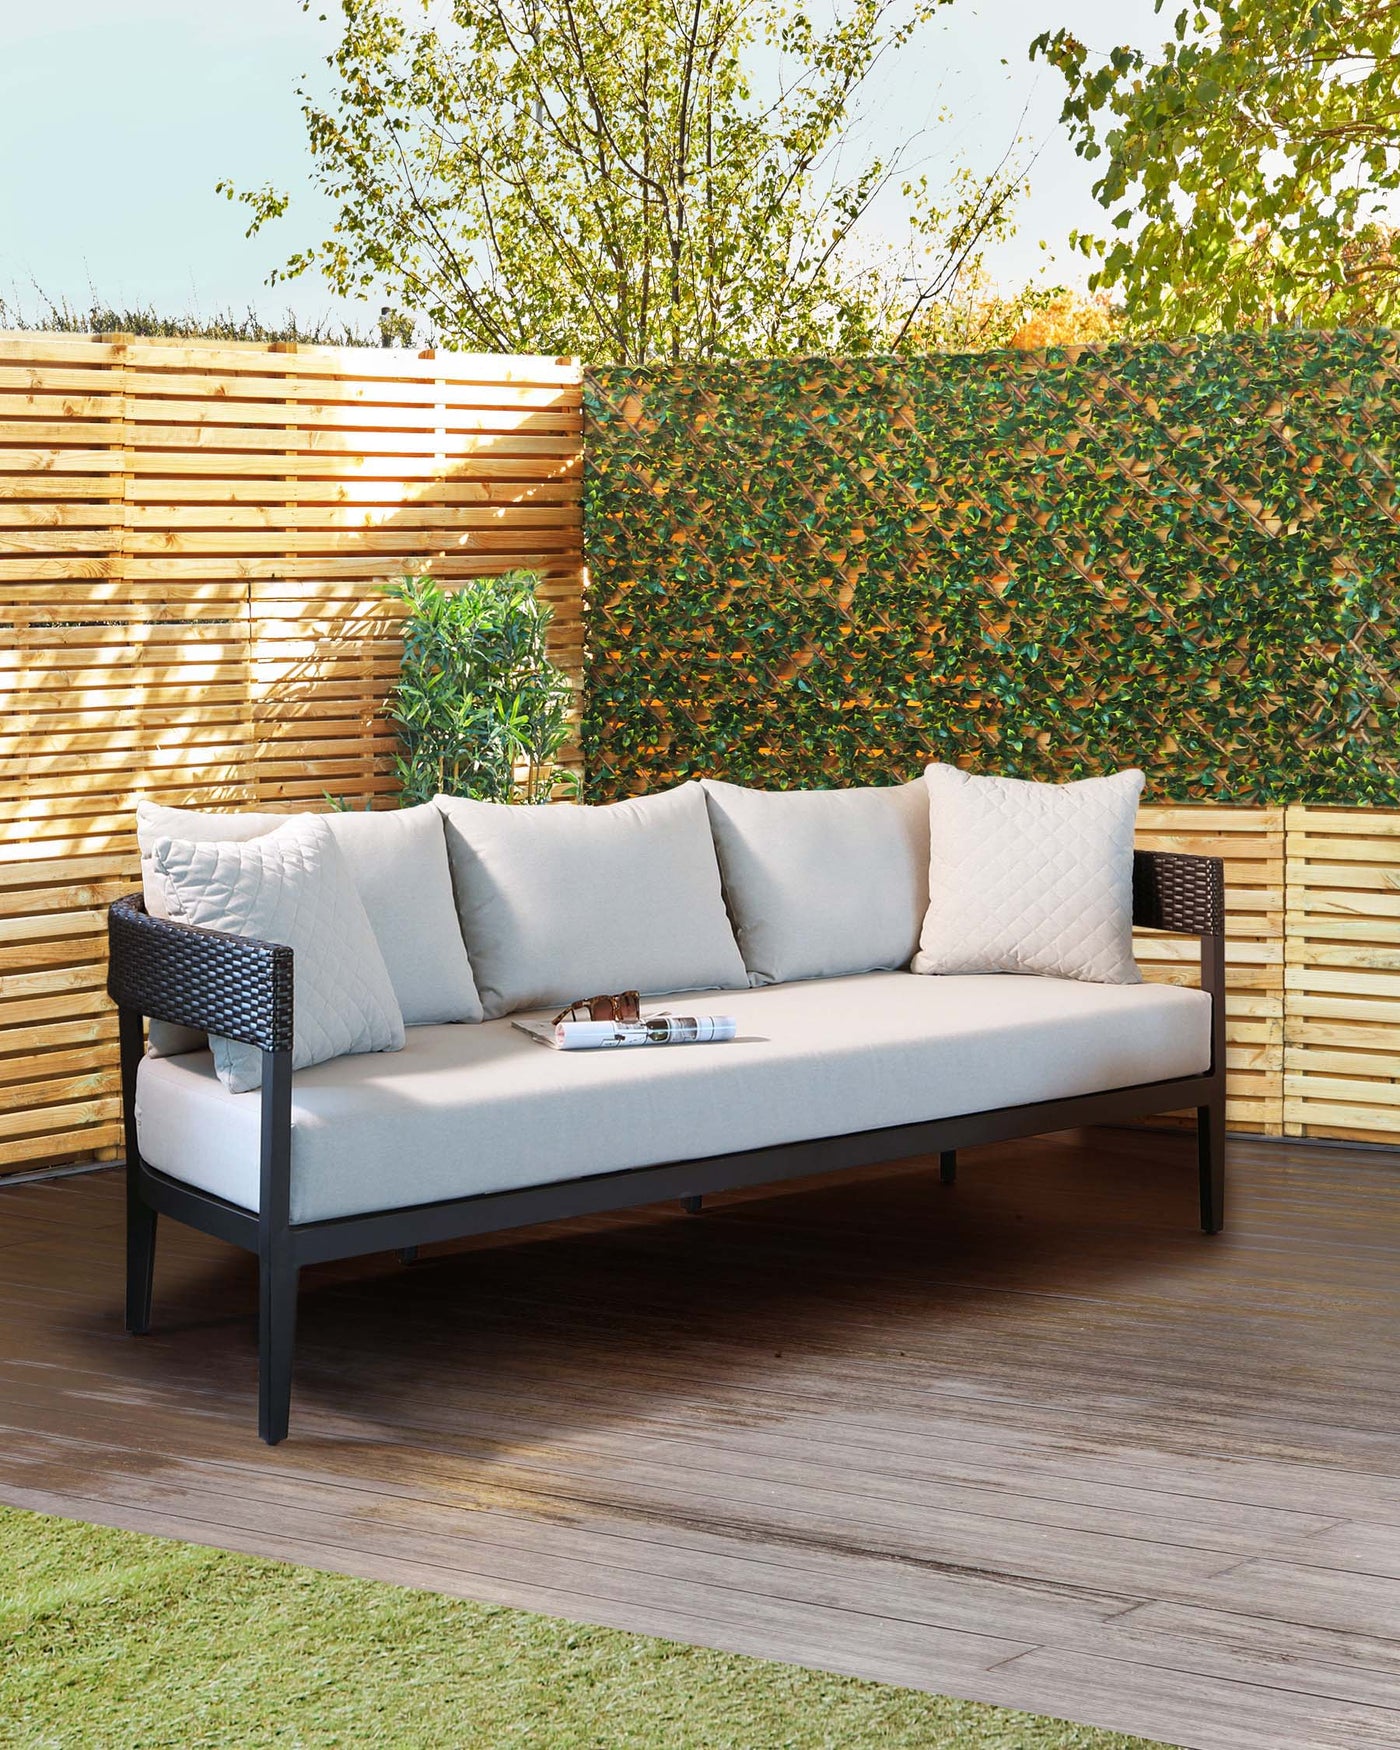 An outdoor sectional sofa with a modern design, featuring a black, minimalist frame and light grey cushions, complemented by a series of off-white accent pillows. The sofa is situated on a wooden deck surrounded by greenery.